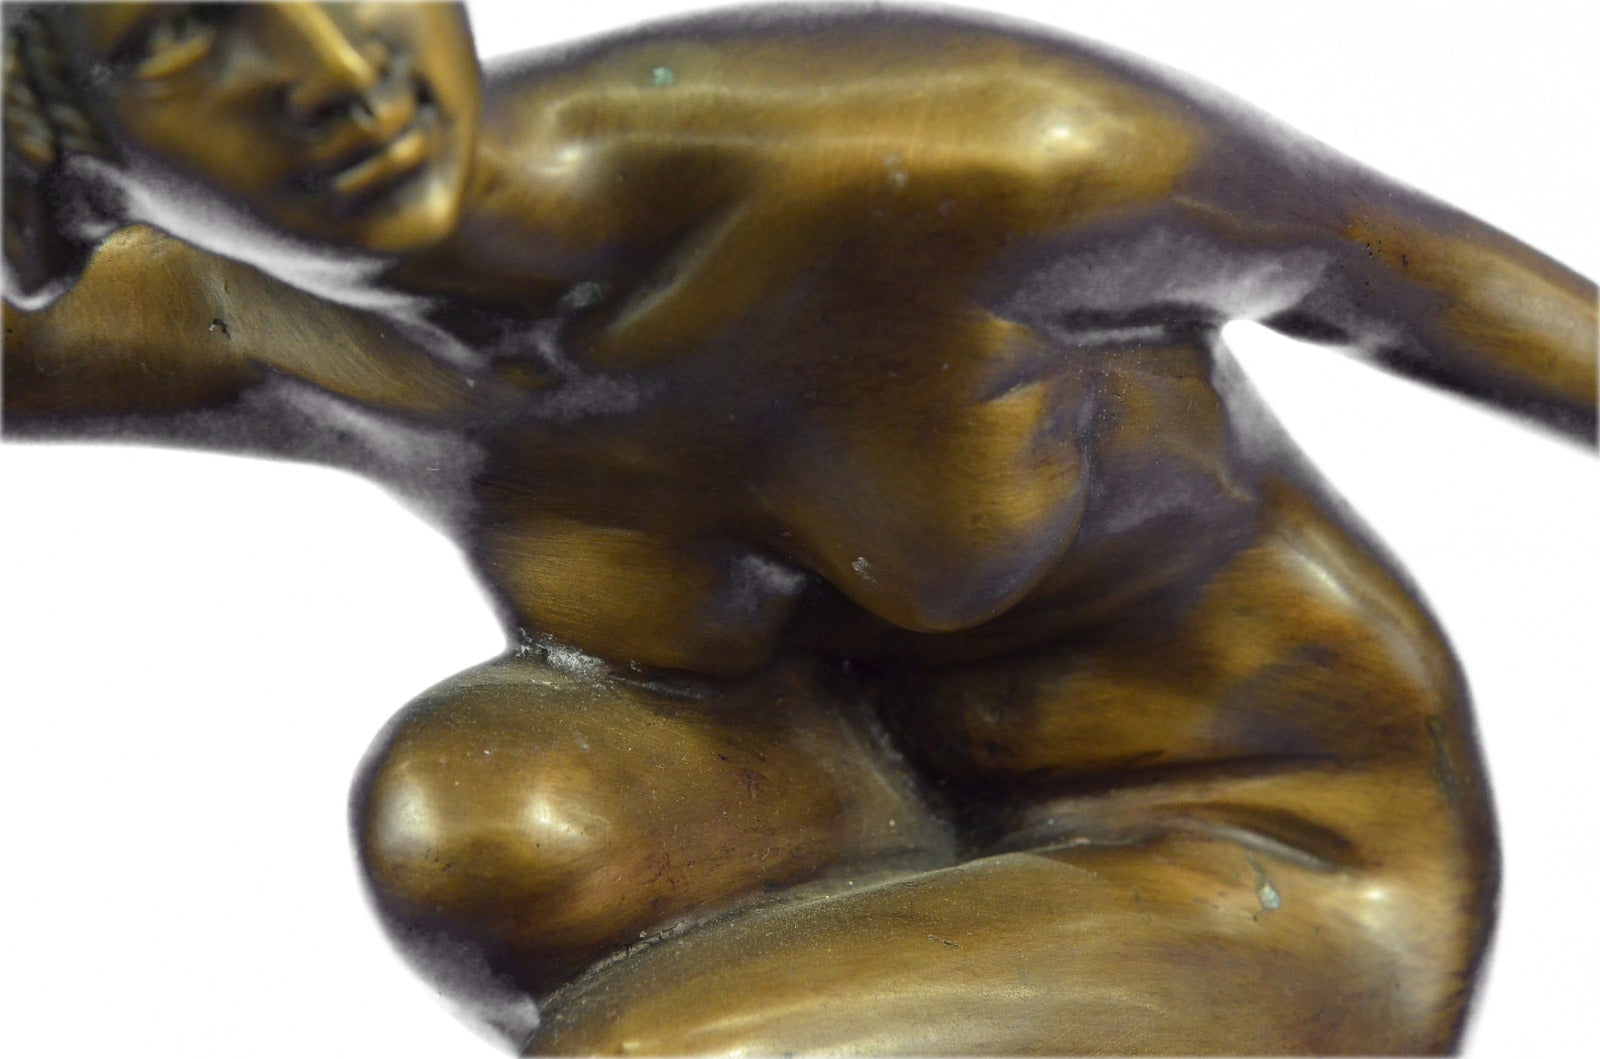 Handcrafted bronze sculpture SALE Marble Performer Nudist Gorgeous Gory Signed